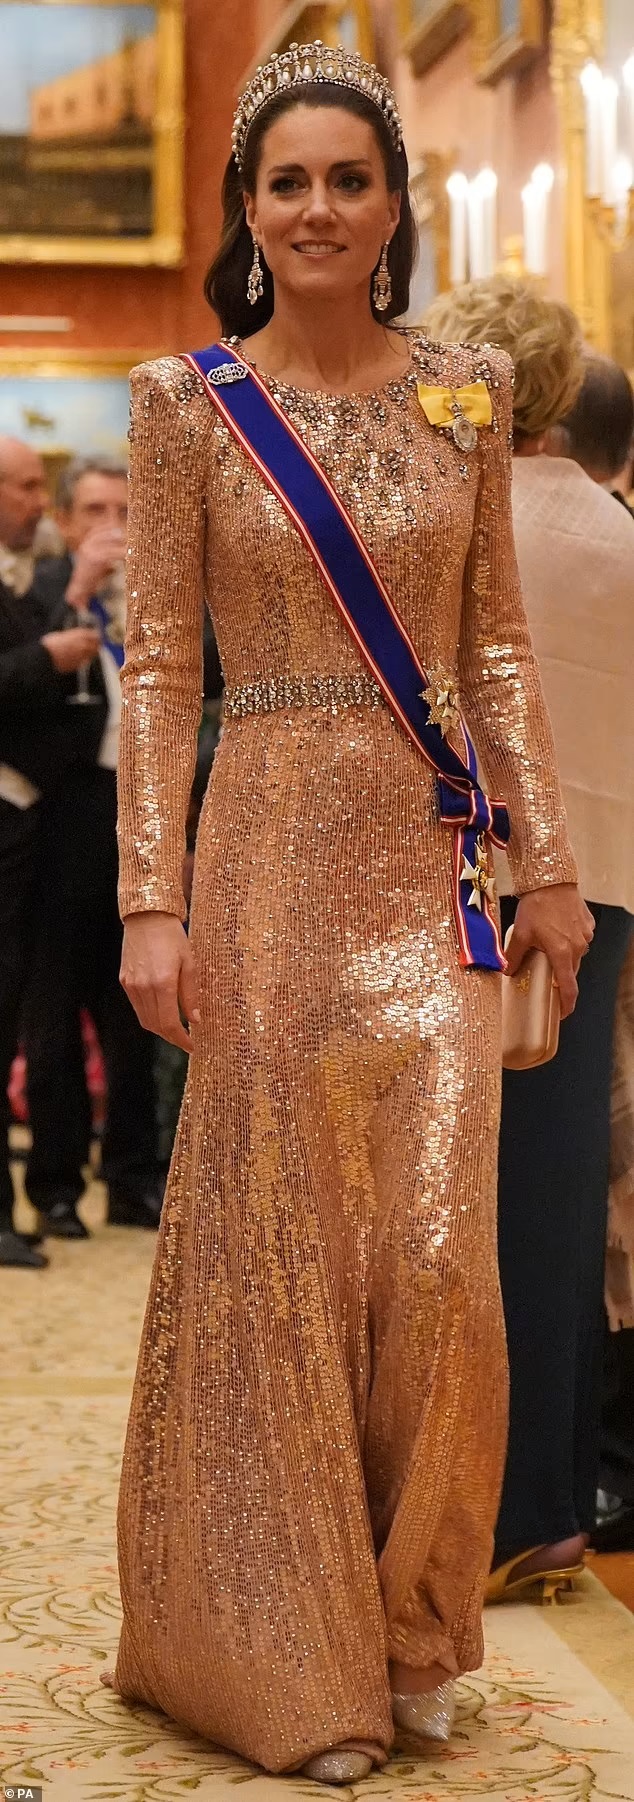 The Princess of Wales looked as radiant as ever as she attended the Buckingham Palace Christmas Diplomatic Receptio